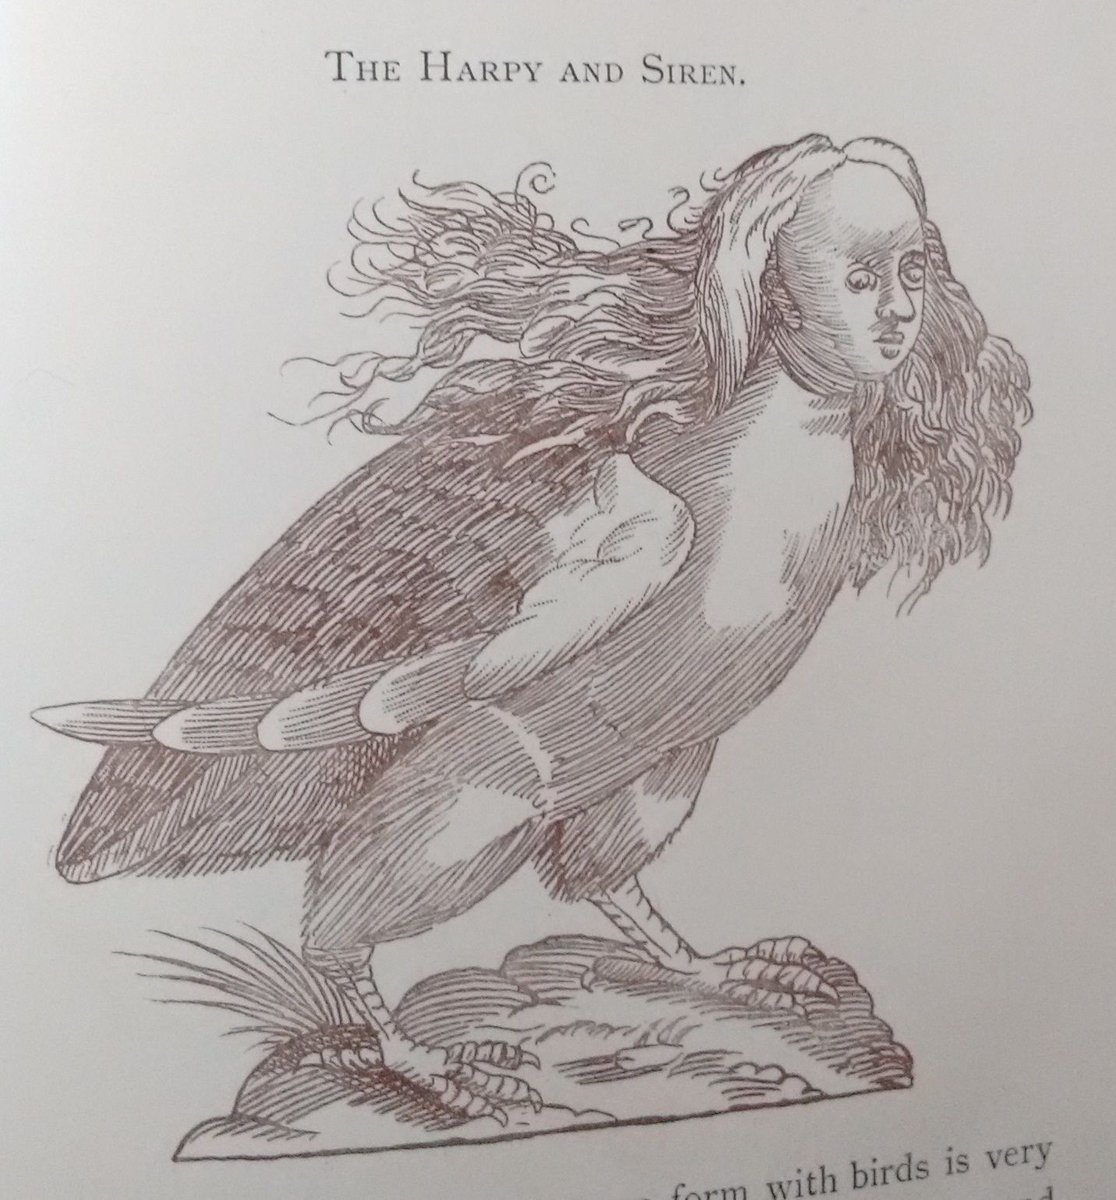 The Manticora, the Siren and the Harpy in 'Curious Creatures in Zoology', by John Ashton (1900). #ArchiveMyths #Archive30